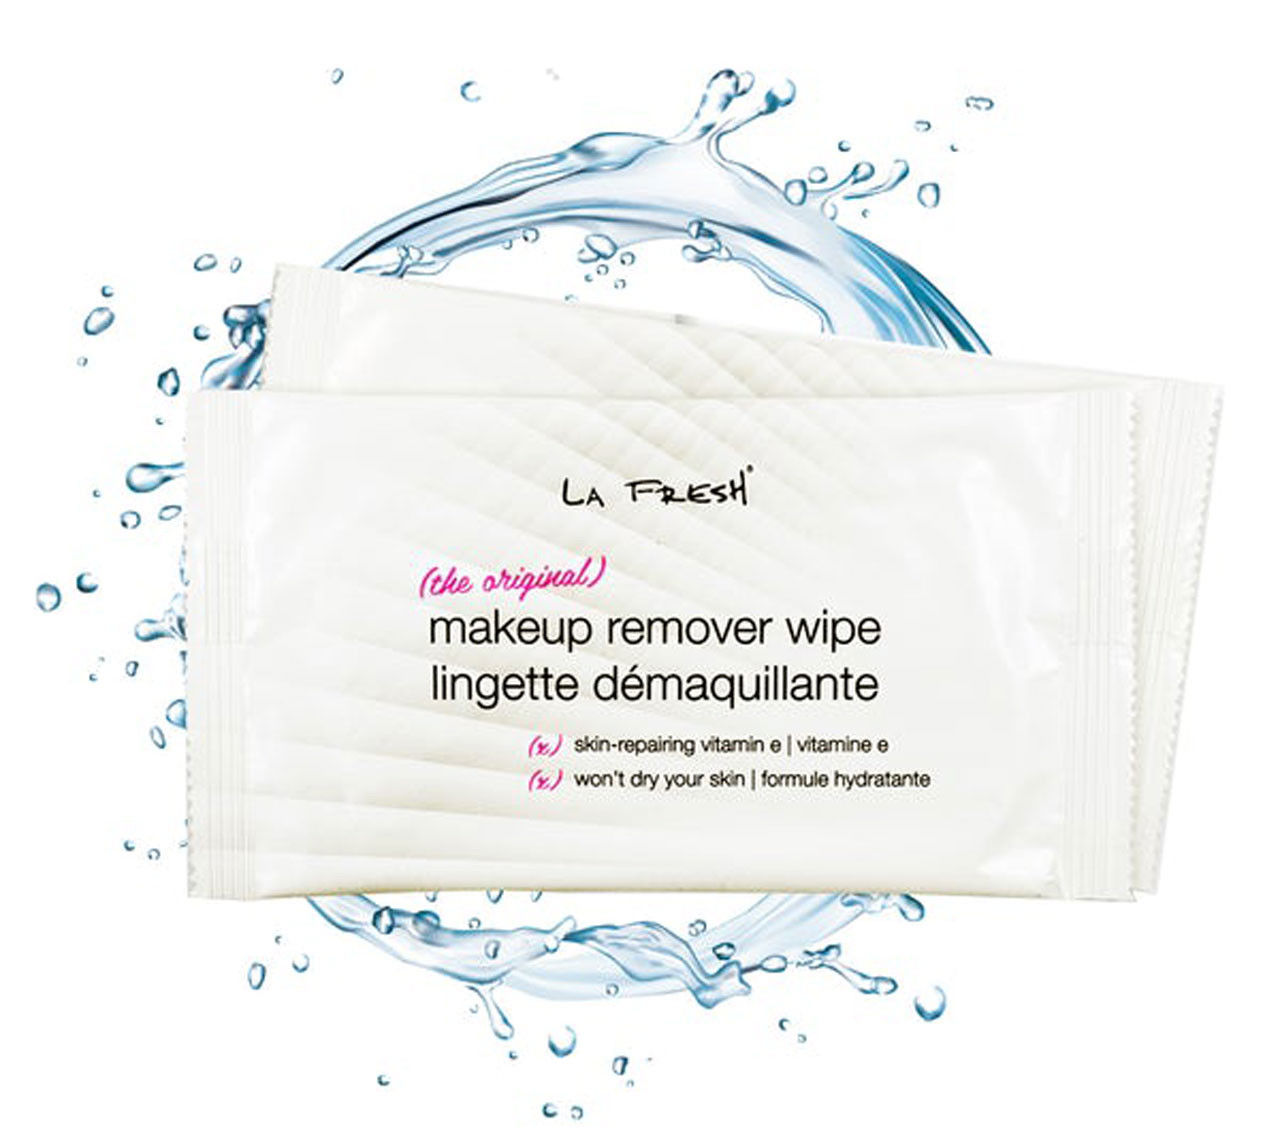 Are La Fresh Makeup Remover wipes recommended for daily use?